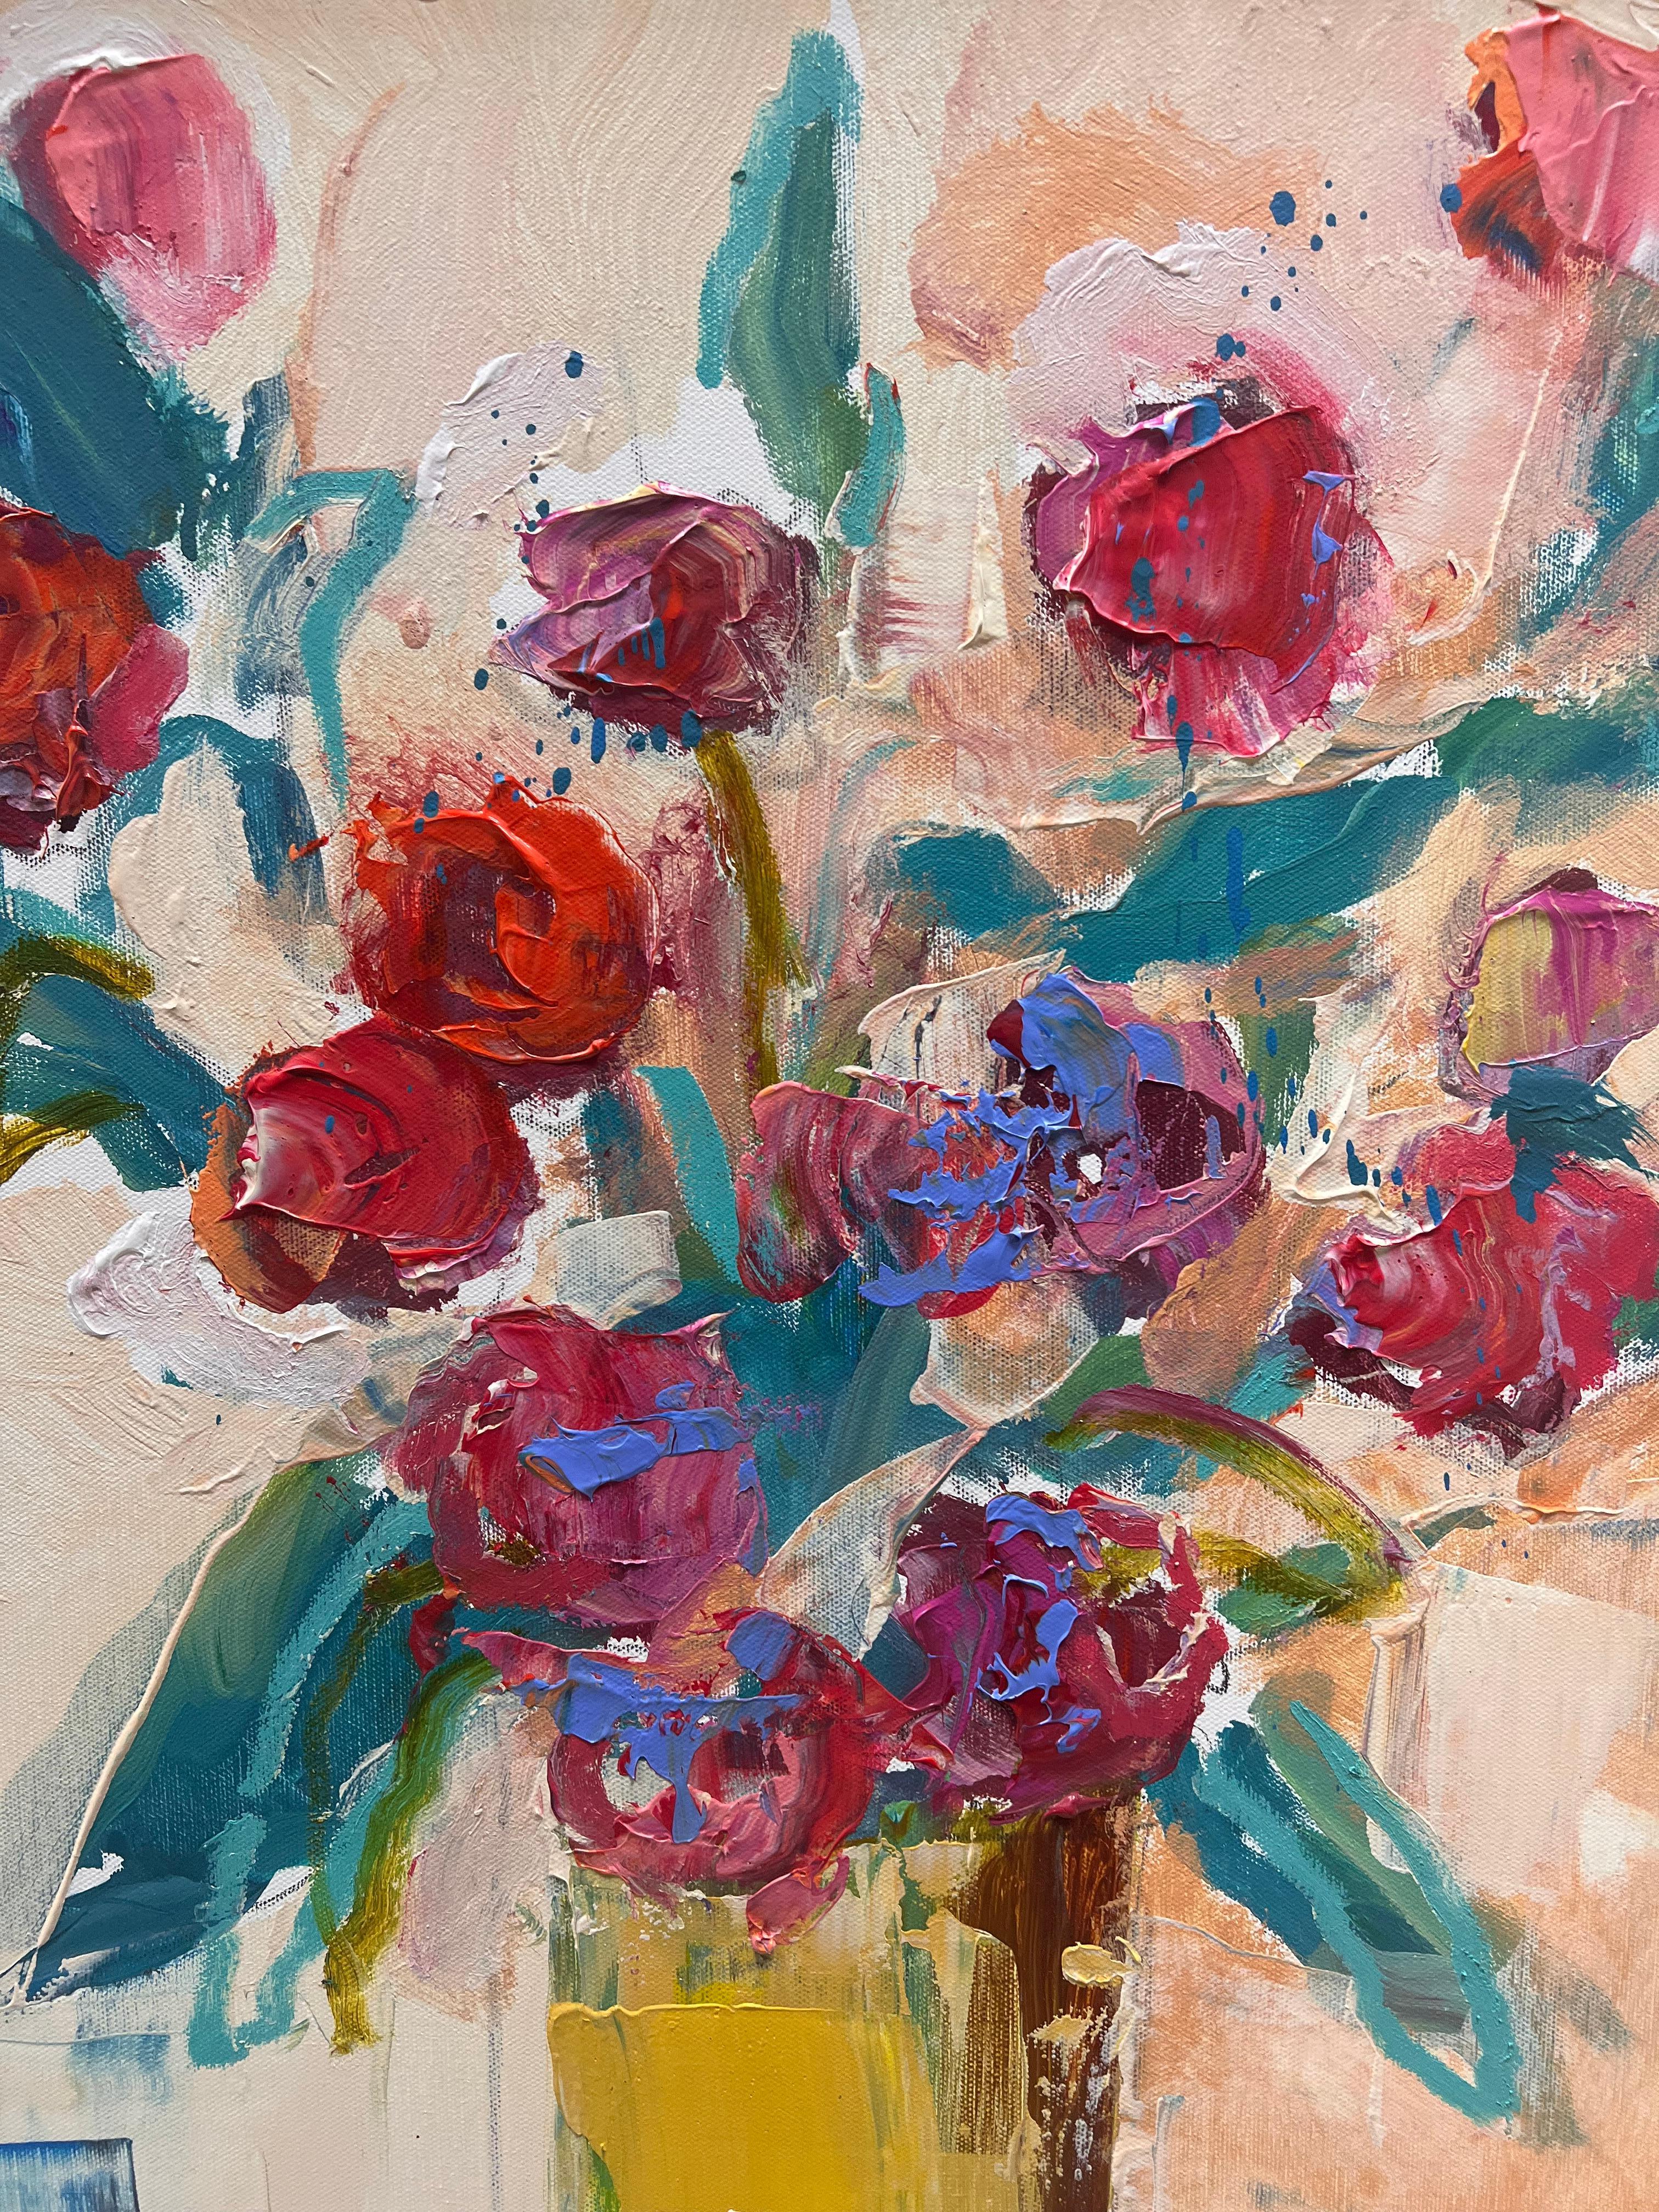 Inspired by nature, Noah has an impressionistic style that borders the edge of abstraction.  He creates landscapes and florals with bold colors and a sense of movement that draw you deep into the work. His energetic compositions are rendered with